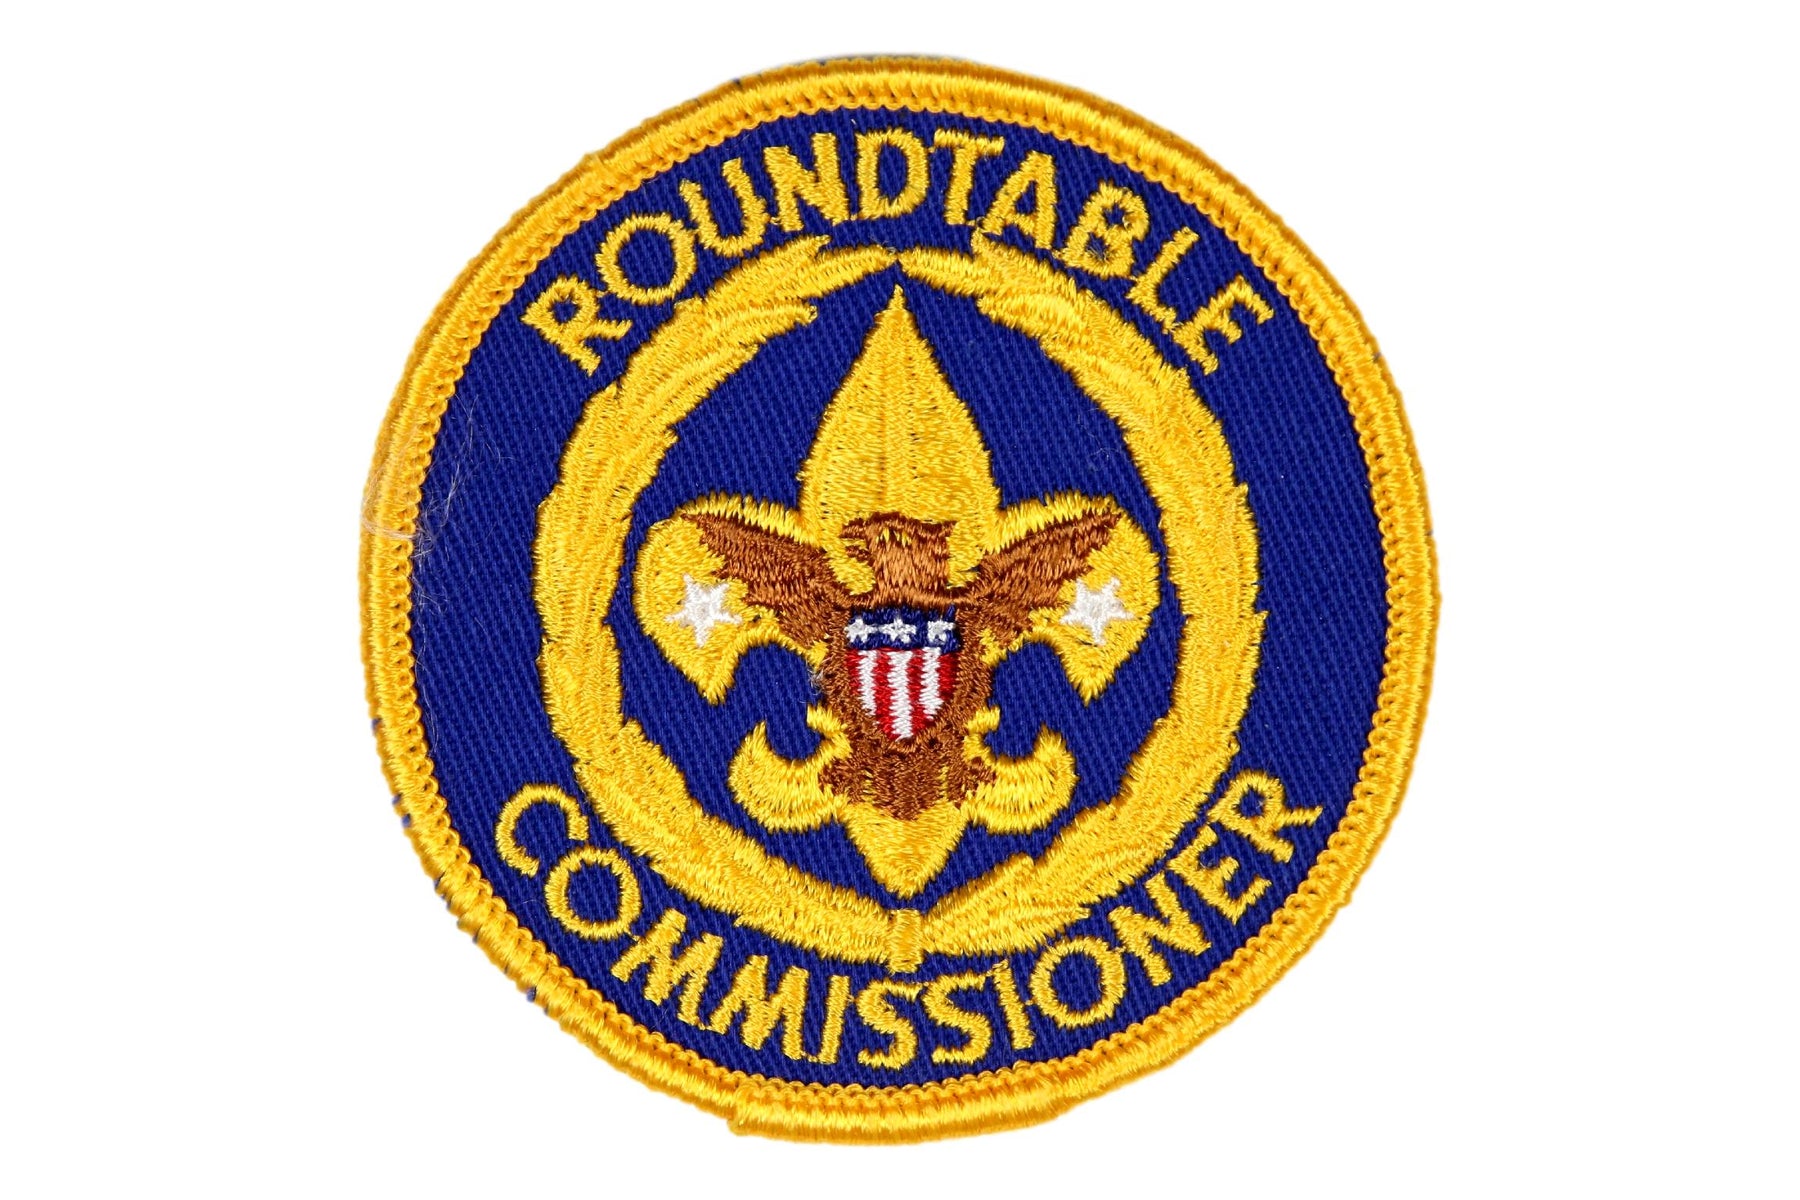 Roundtable Commissioner Patch 1970